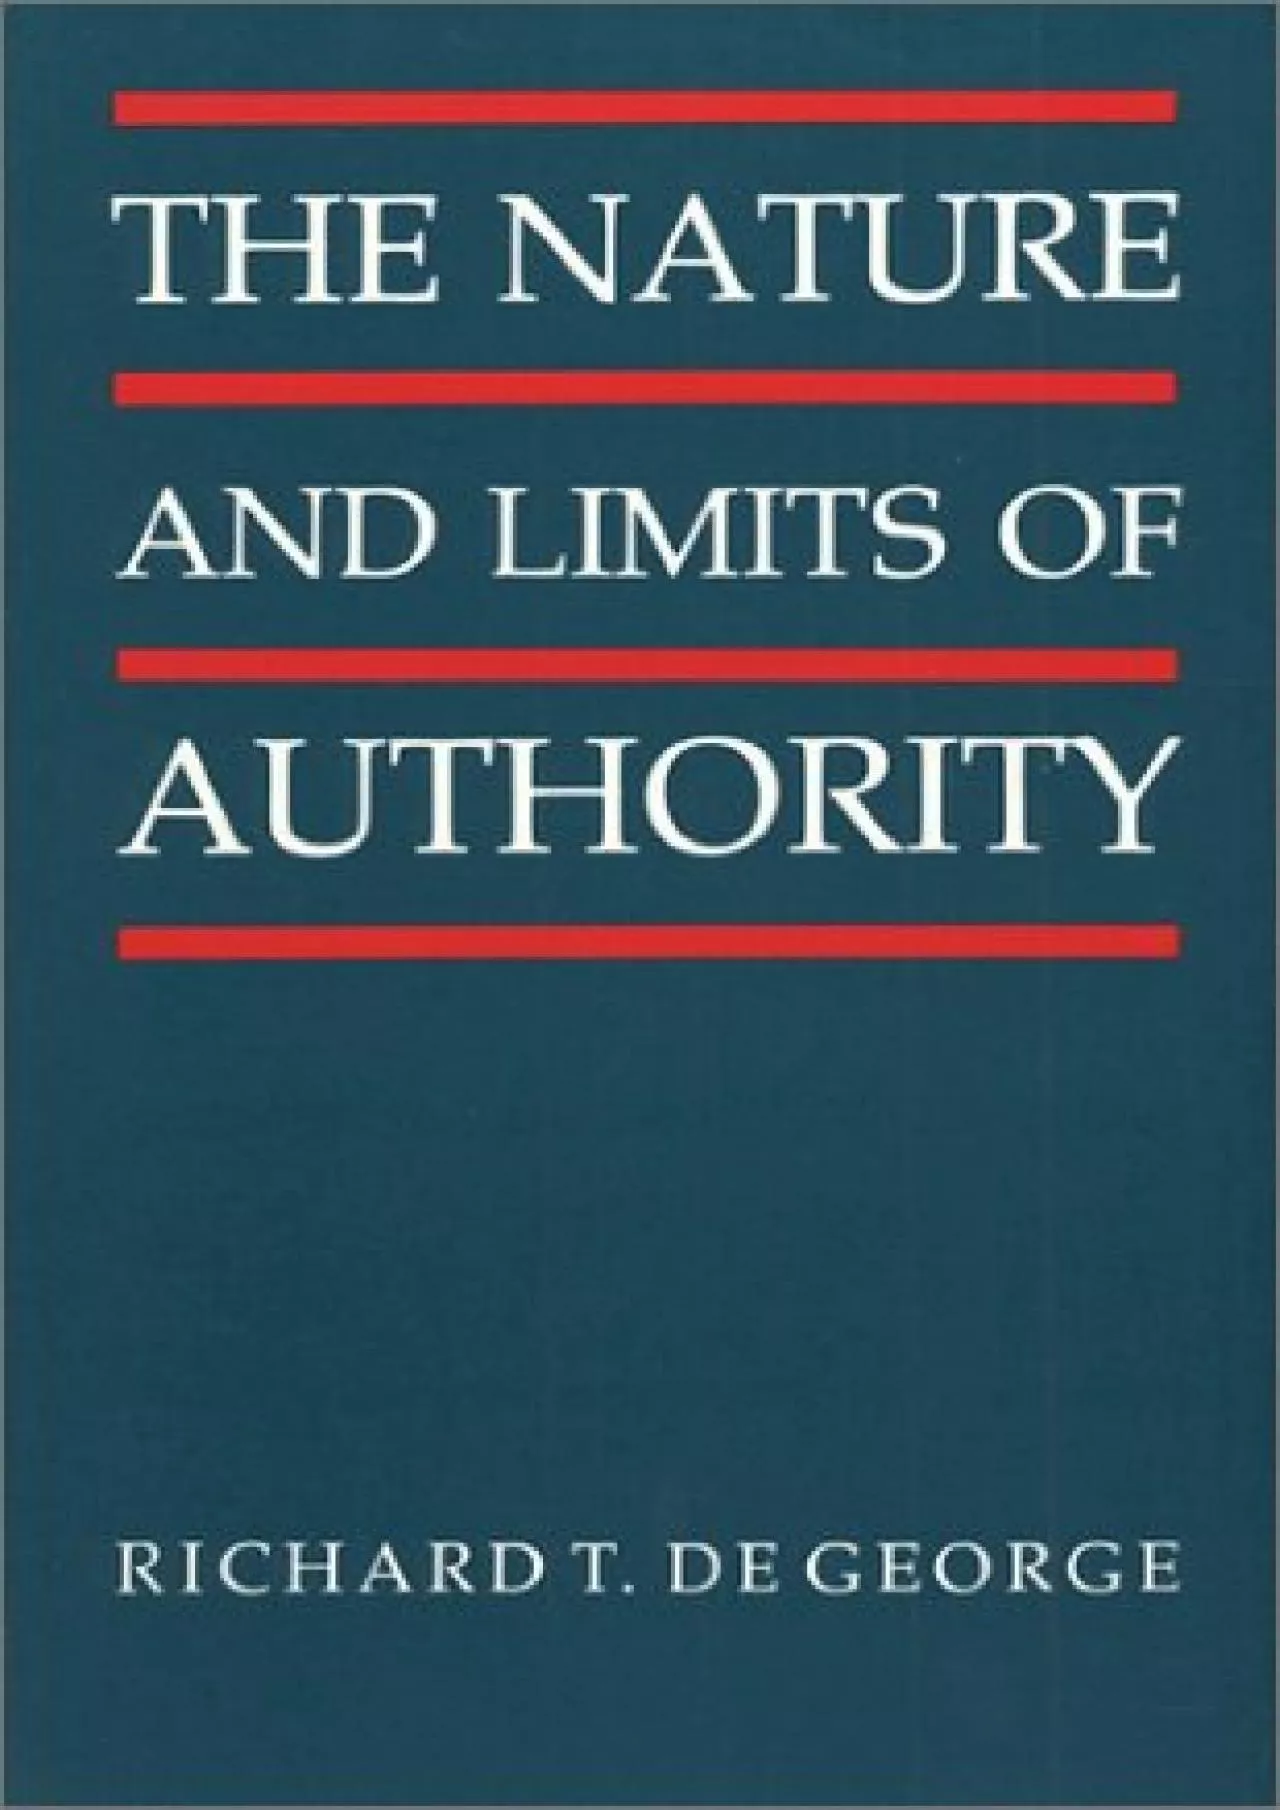 [BOOK]-The Nature and Limits of Authority